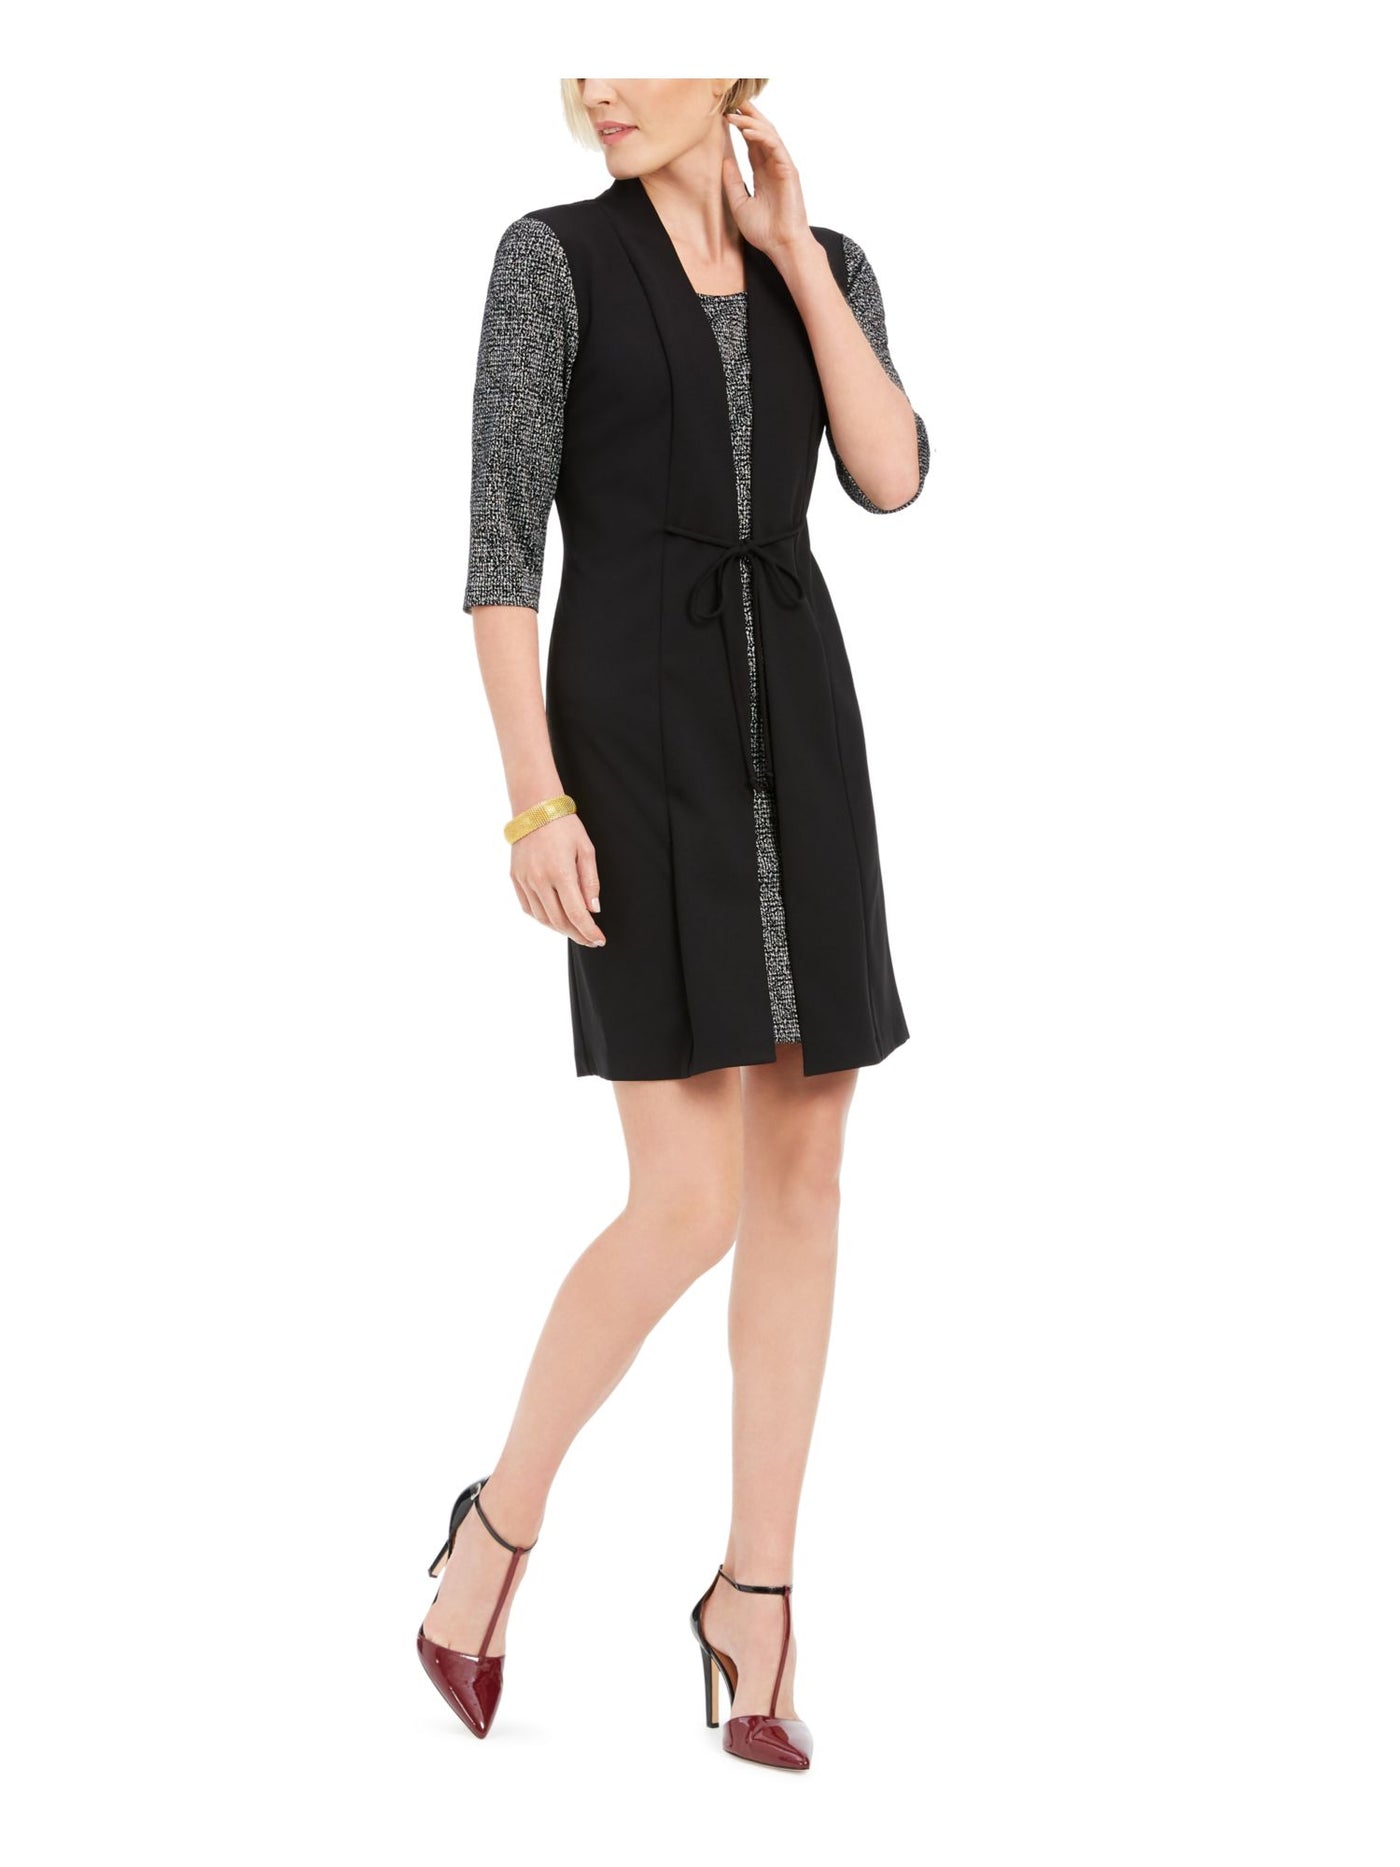 CONNECTED APPAREL Womens 3/4 Sleeve Jewel Neck Short Wear To Work Faux Wrap Dress